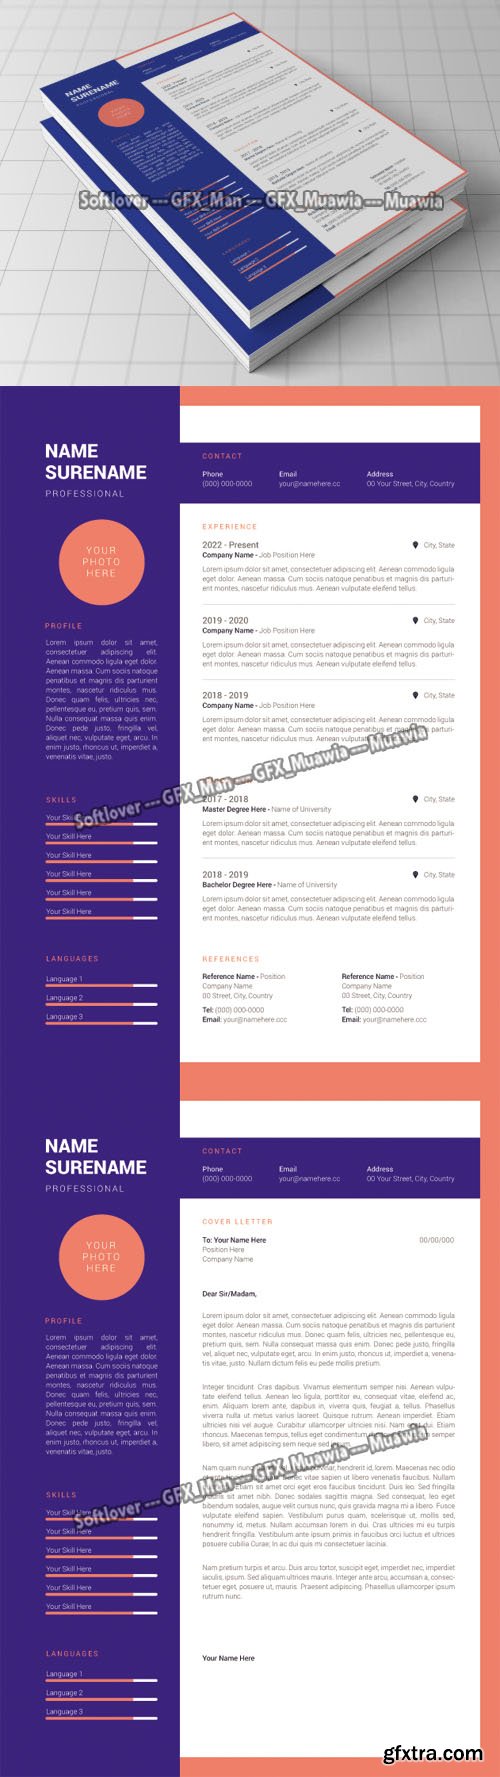 Clean Resume CV & Cover Letter Vector Templates